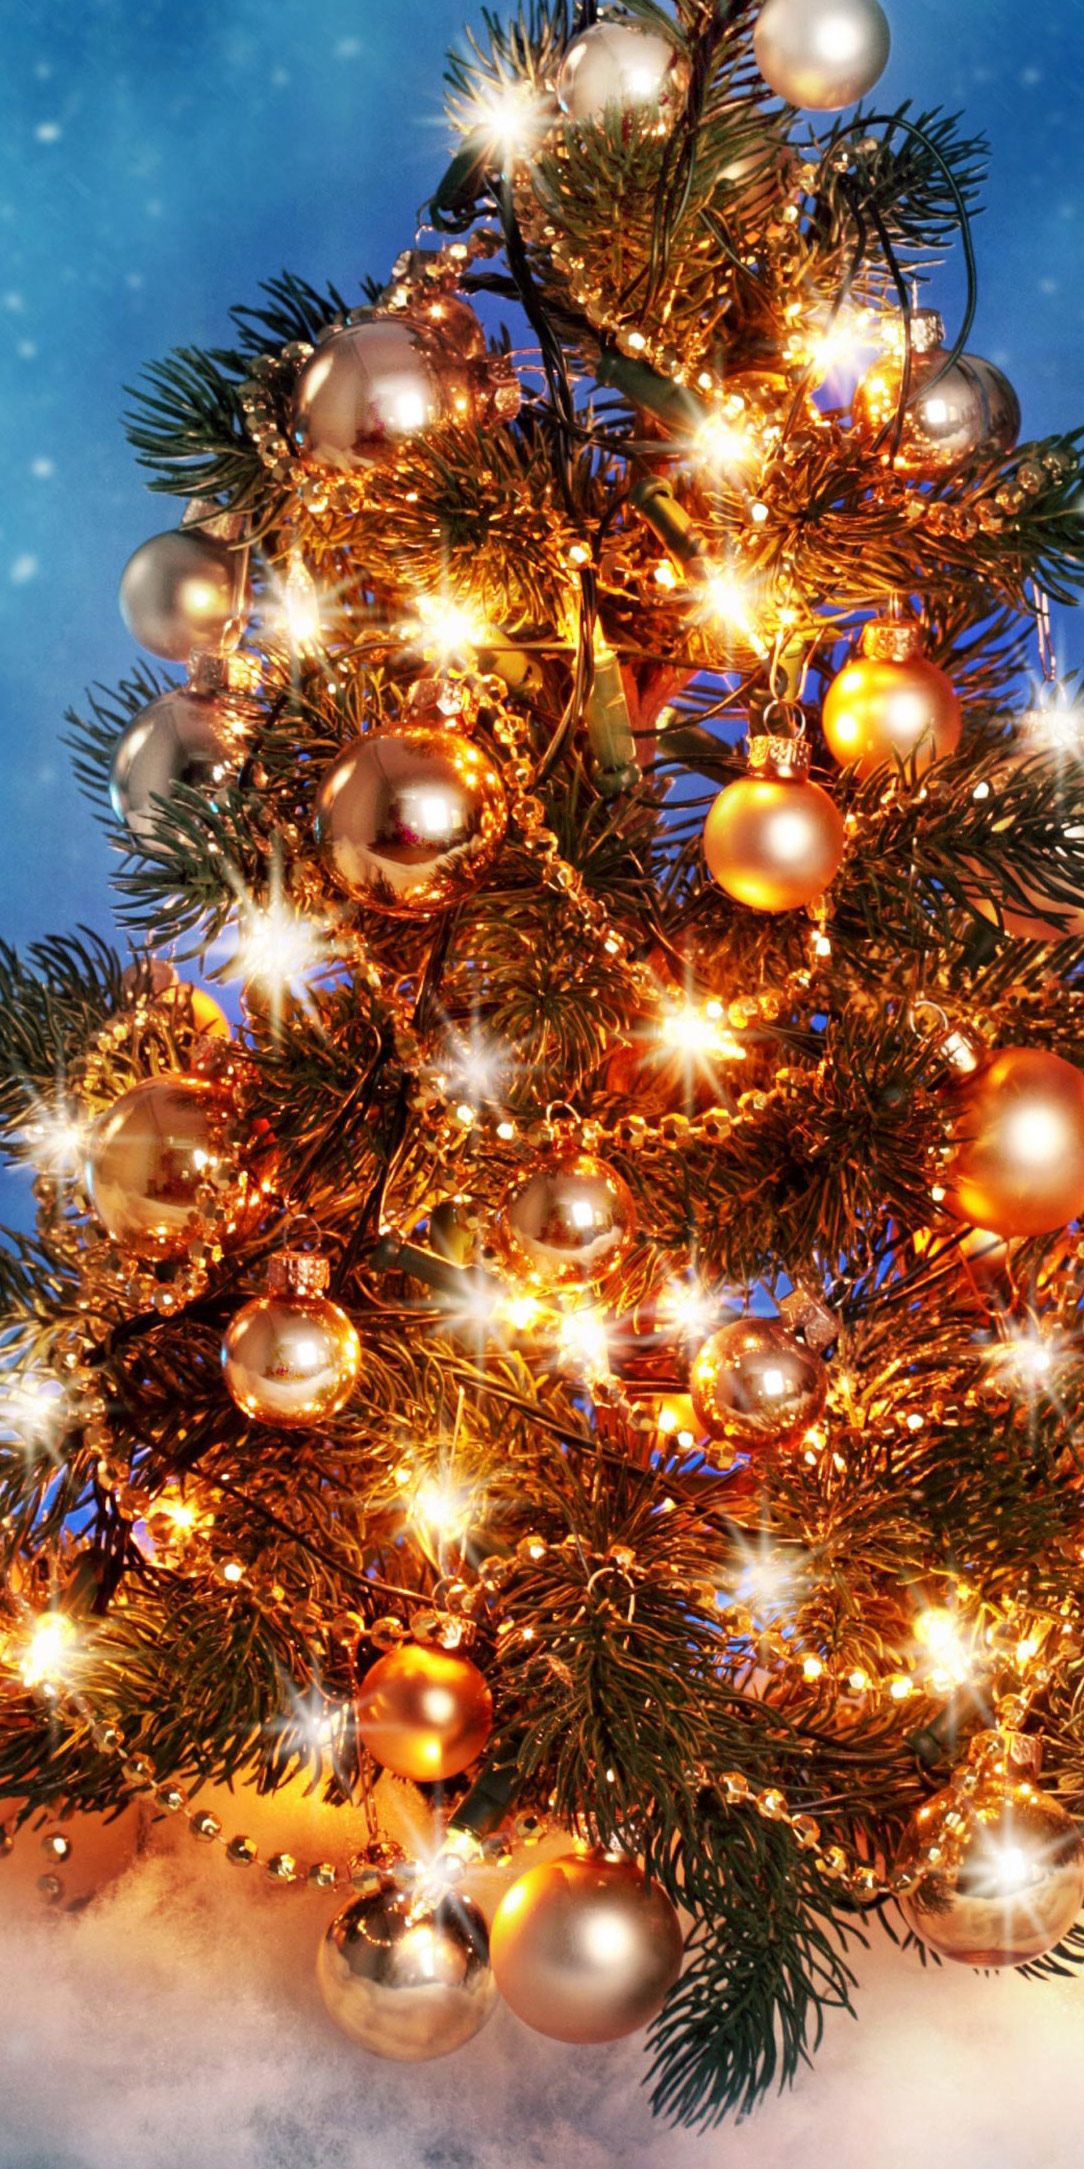 Christmas HD and Widescreen Wallpaper. Christmas Tree Holiday 4K Holiday HD W. Christmas wallpaper, Free christmas wallpaper downloads, Christmas wallpaper free